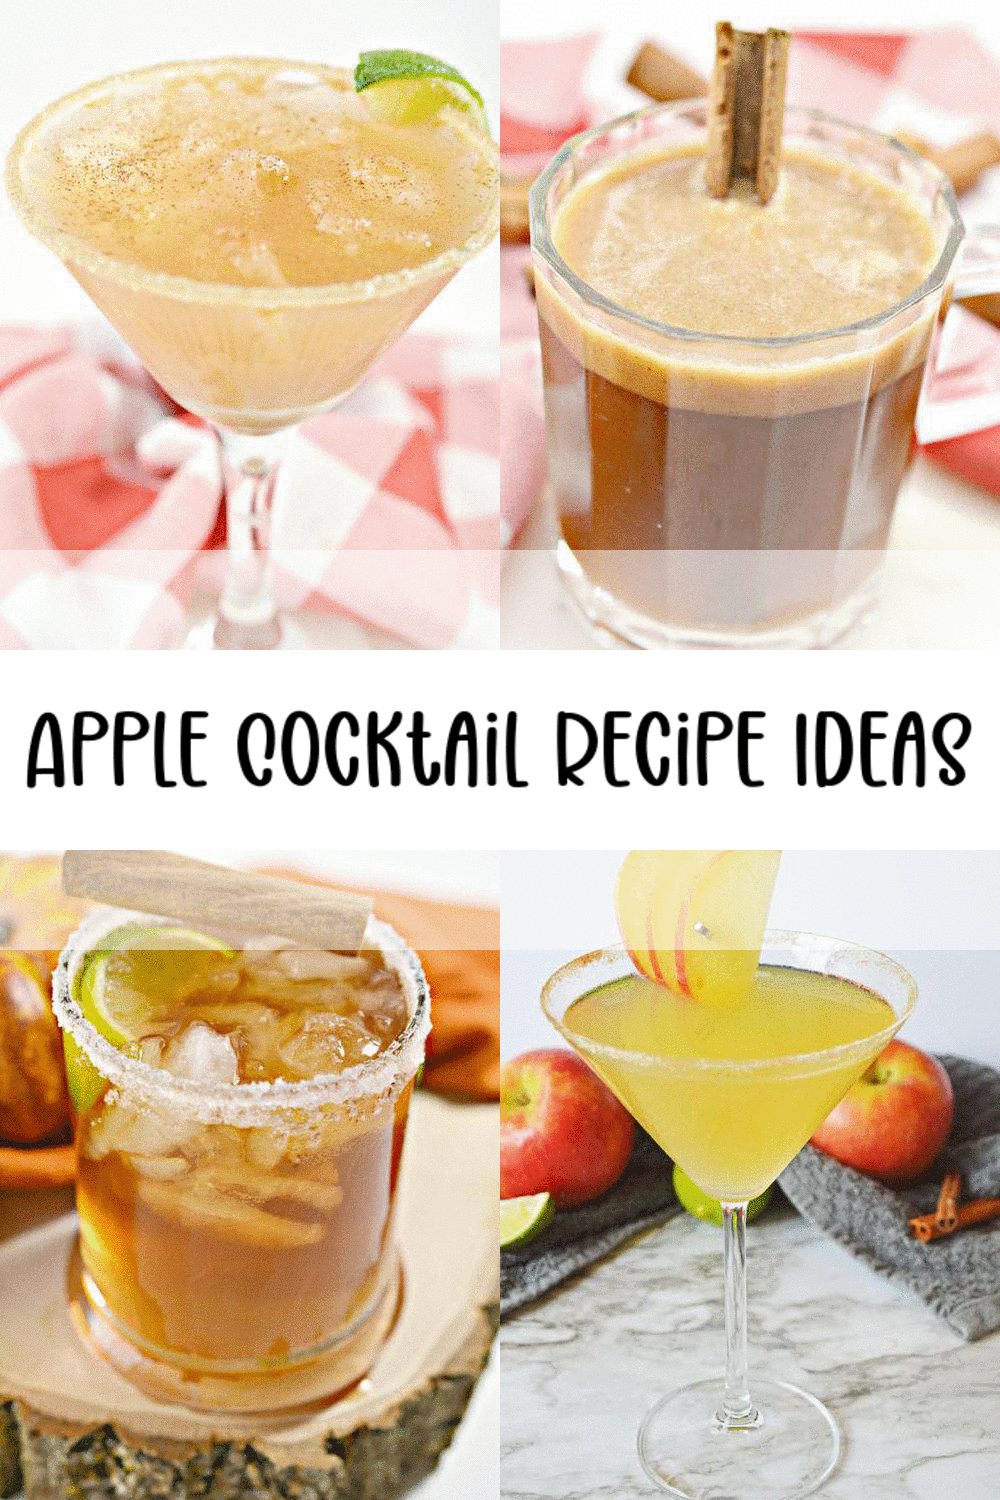 8 Apple Cocktail Recipes - Best Apple Mixed Drinks Ideas